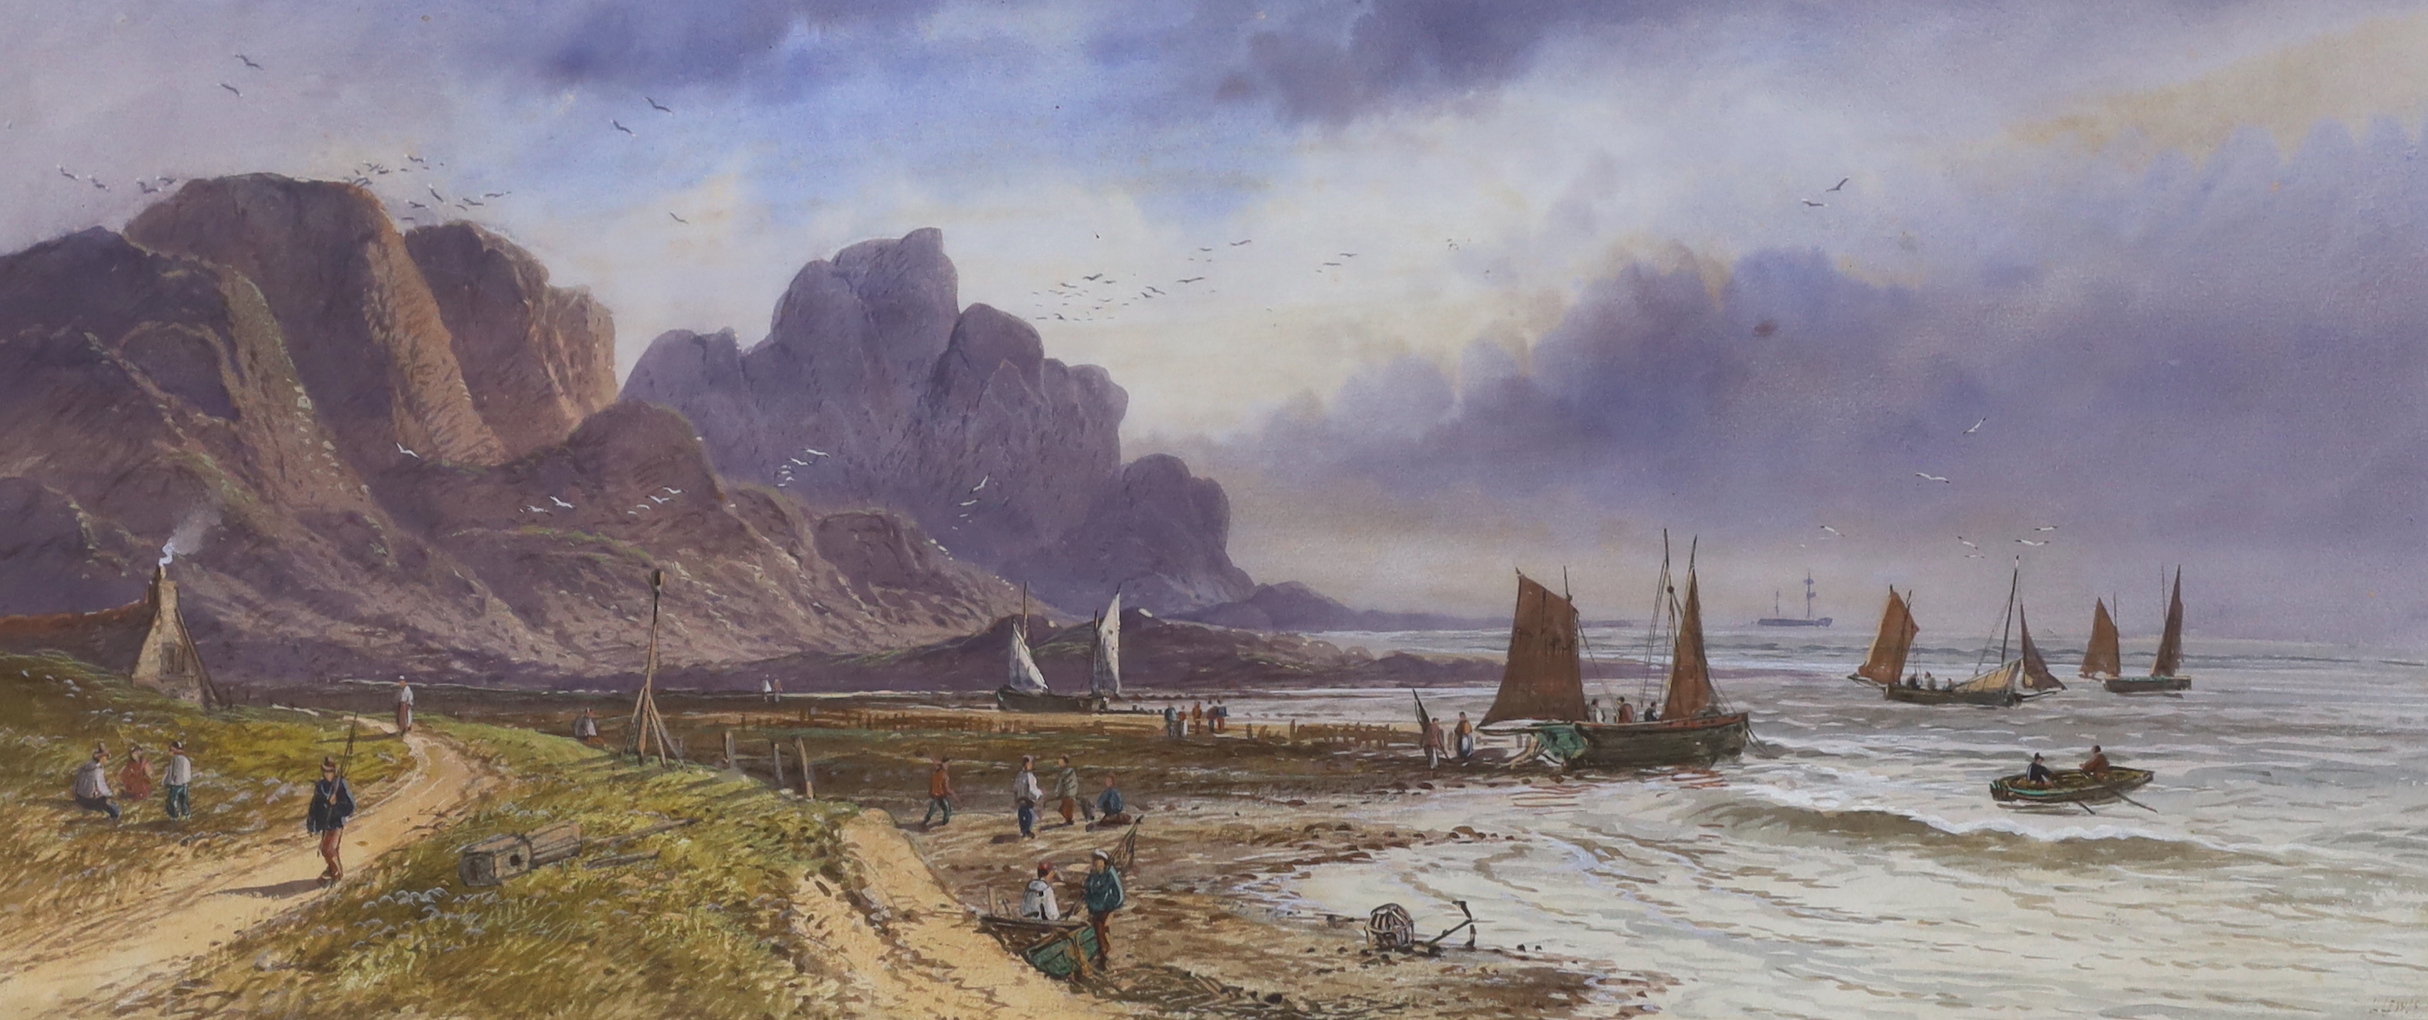 Leonard Lewis (1826-1913), pair of watercolours, Coastal scenes with fishermen, signed and indistinctly dated, 22 x 52cm